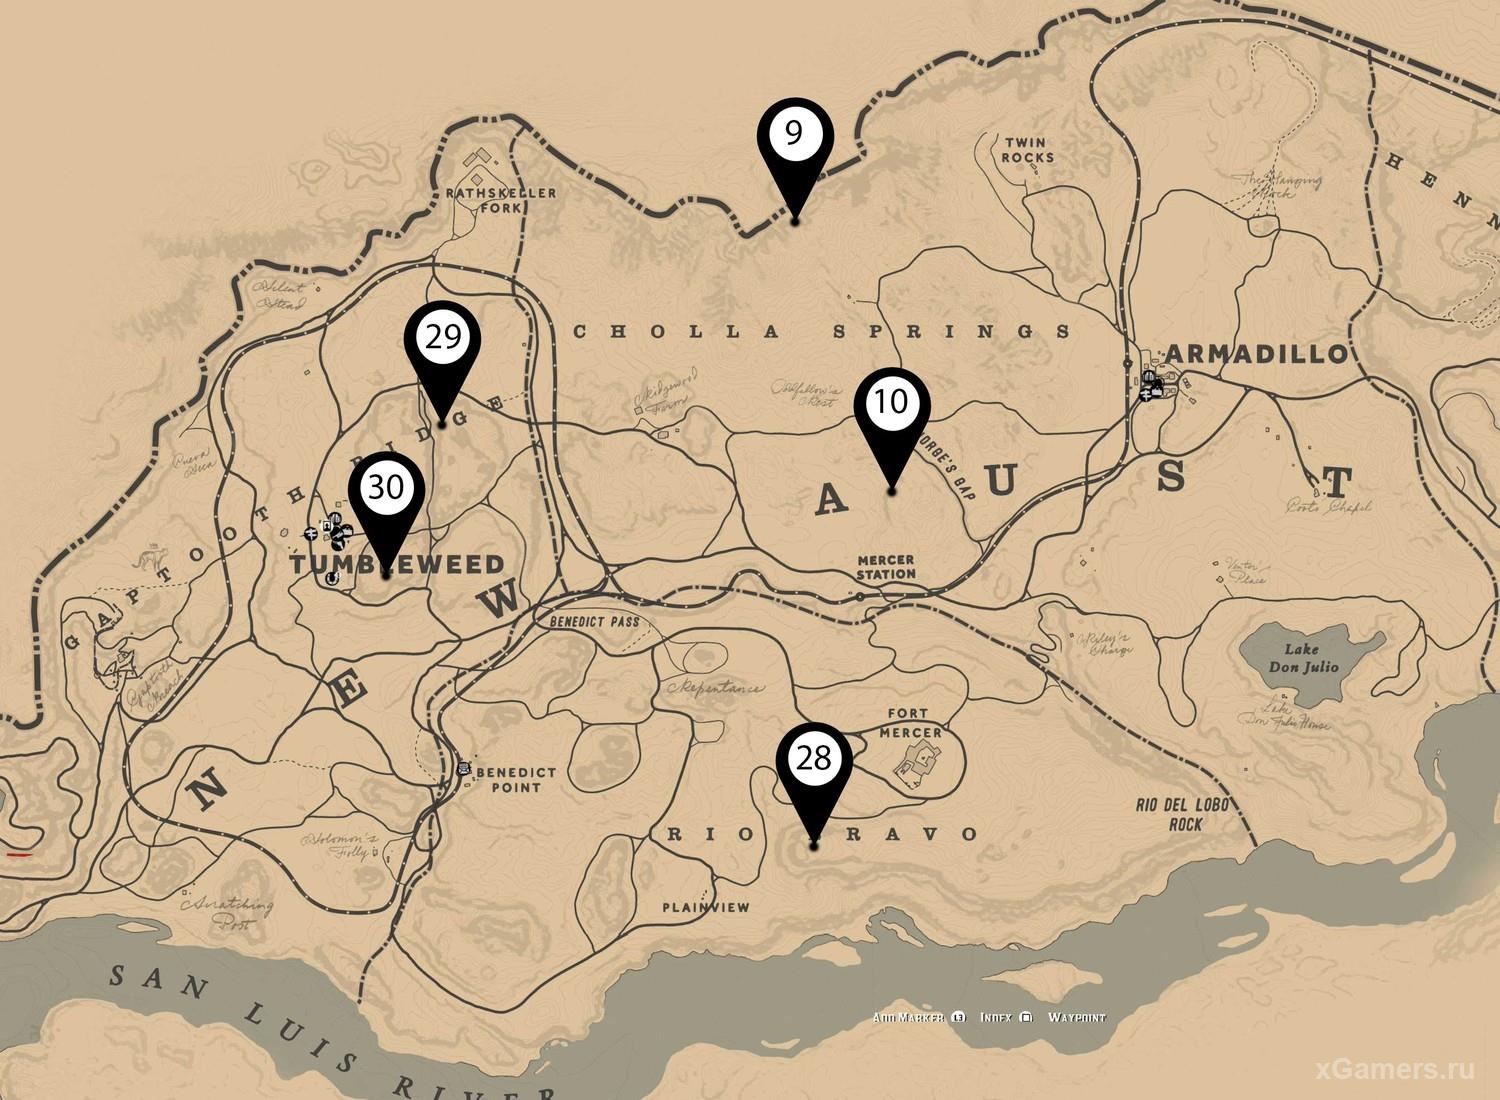 Maps with the location of the bone fragments in the game RDR2